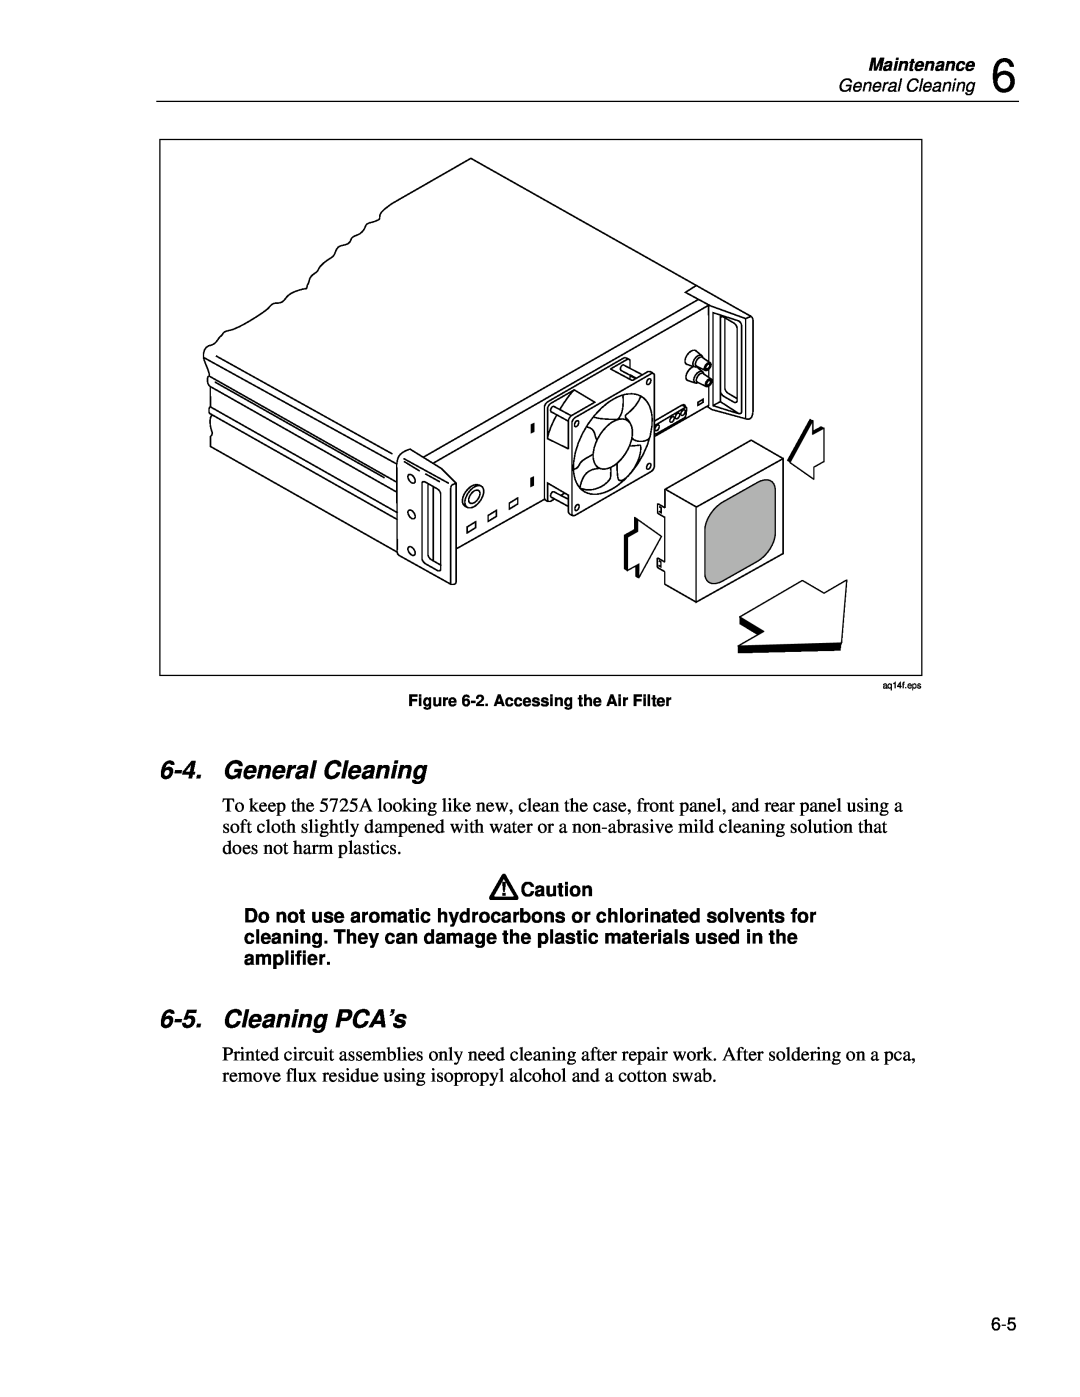 Fluke 5725A instruction manual General Cleaning, Cleaning PCA’s 